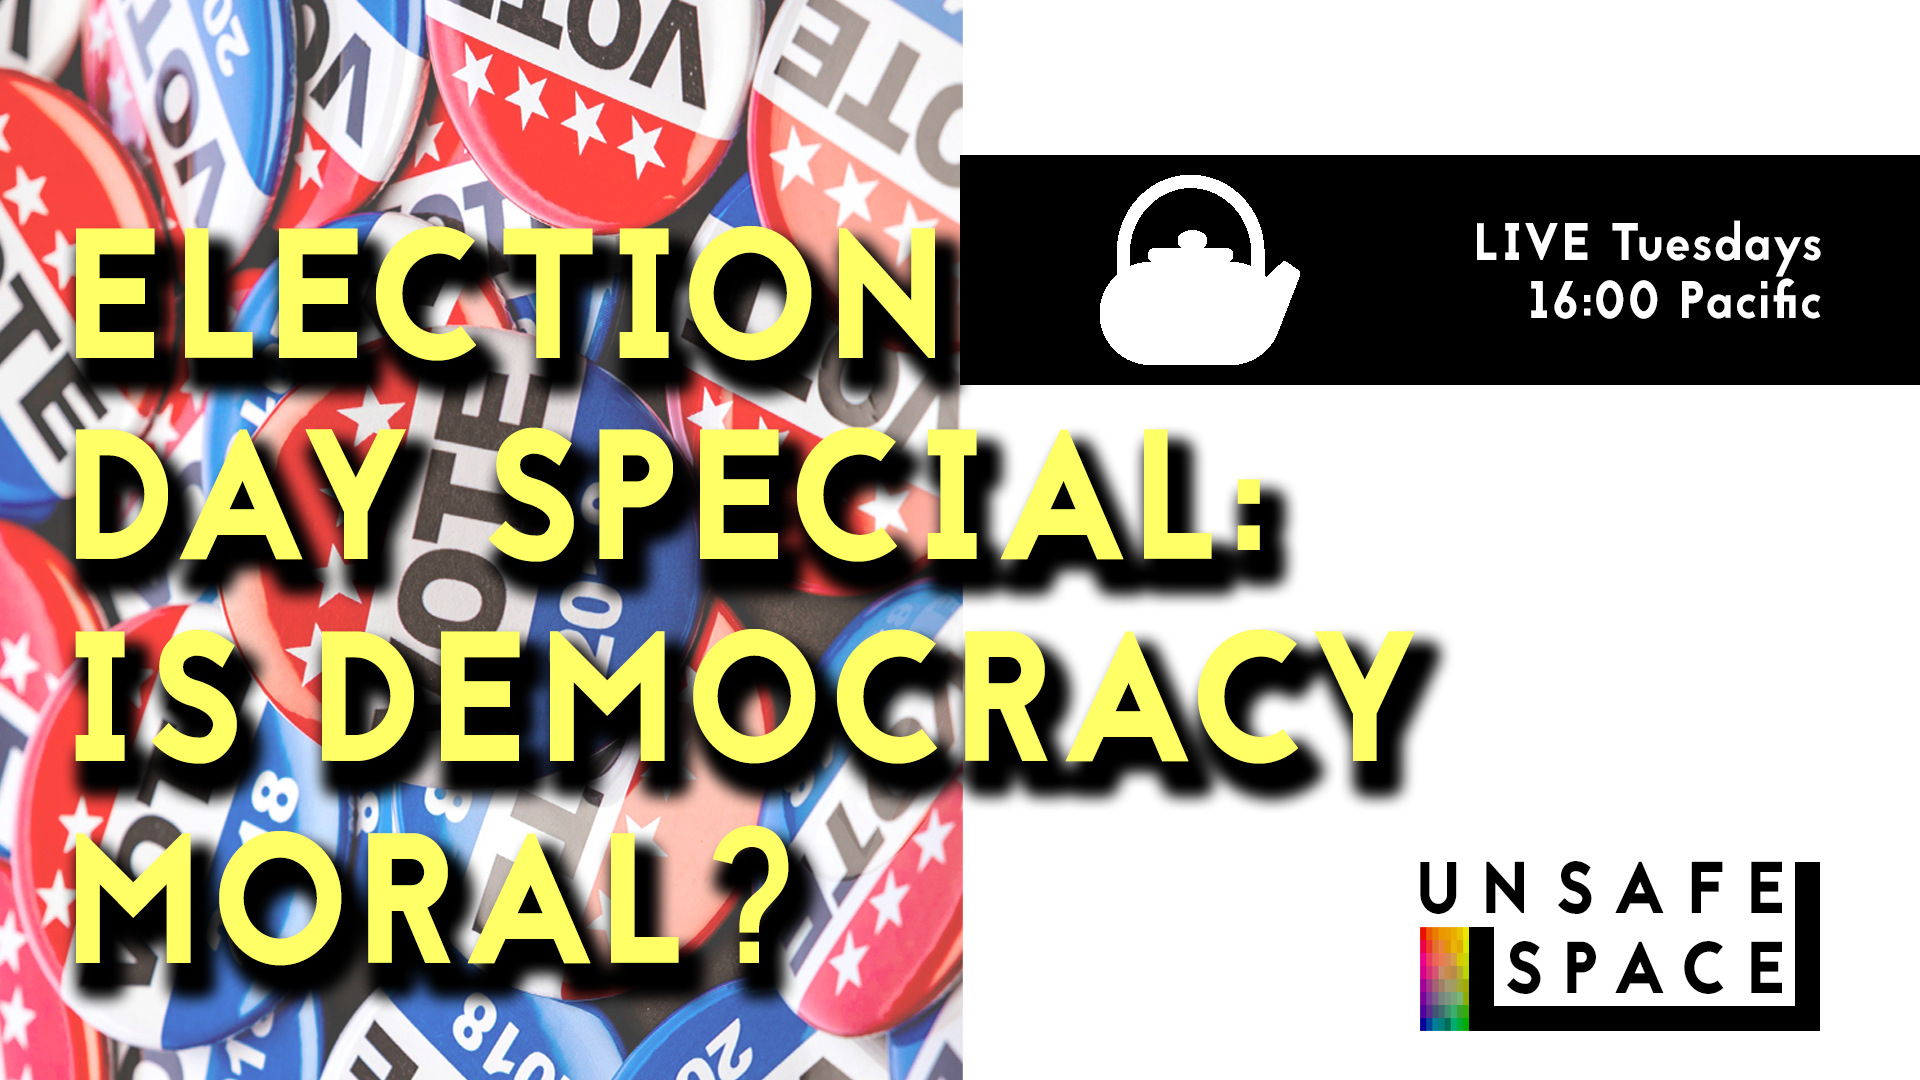 [Live Episode 028] Teatime: Election Day Special: Is Democracy Moral?